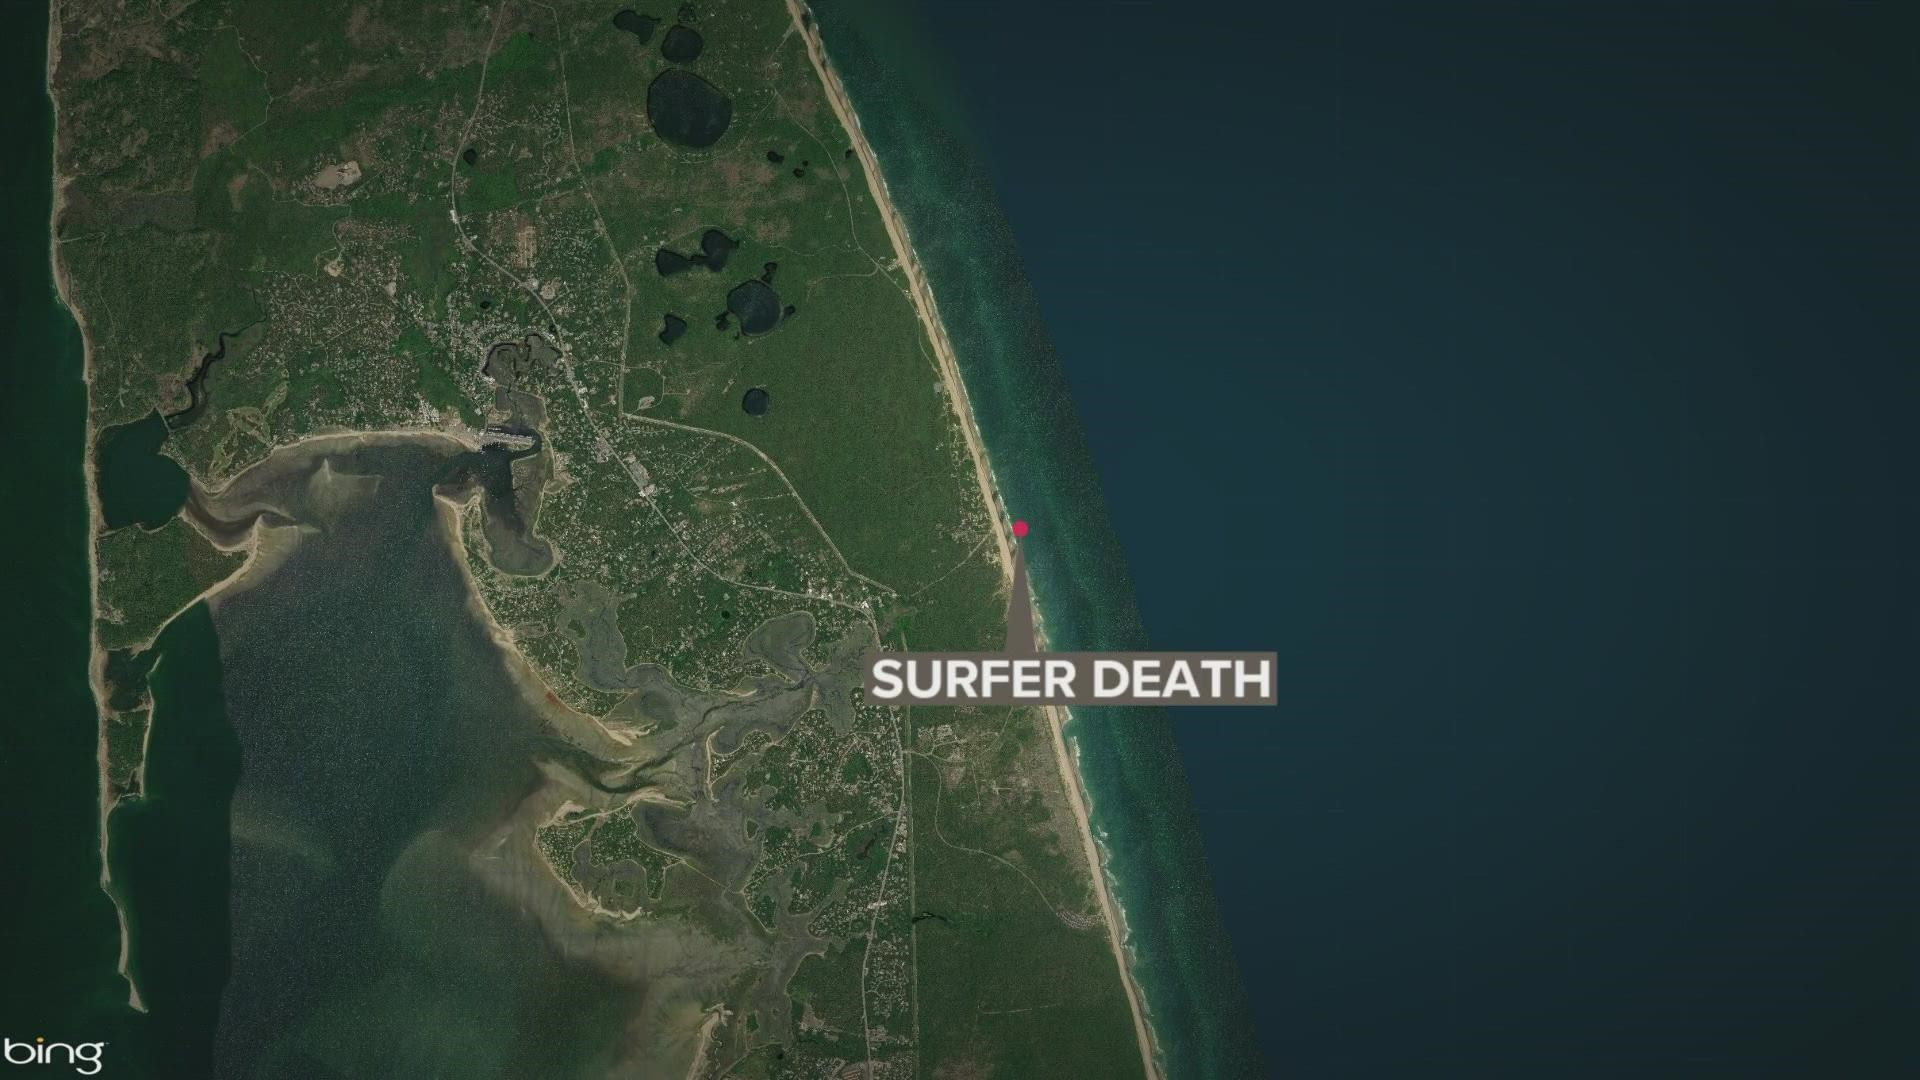 Martin Mackey, 48, was pulled from the ocean off LeCount Hollow Beach in Wellfleet, Massachusetts, Wednesday morning, police said.